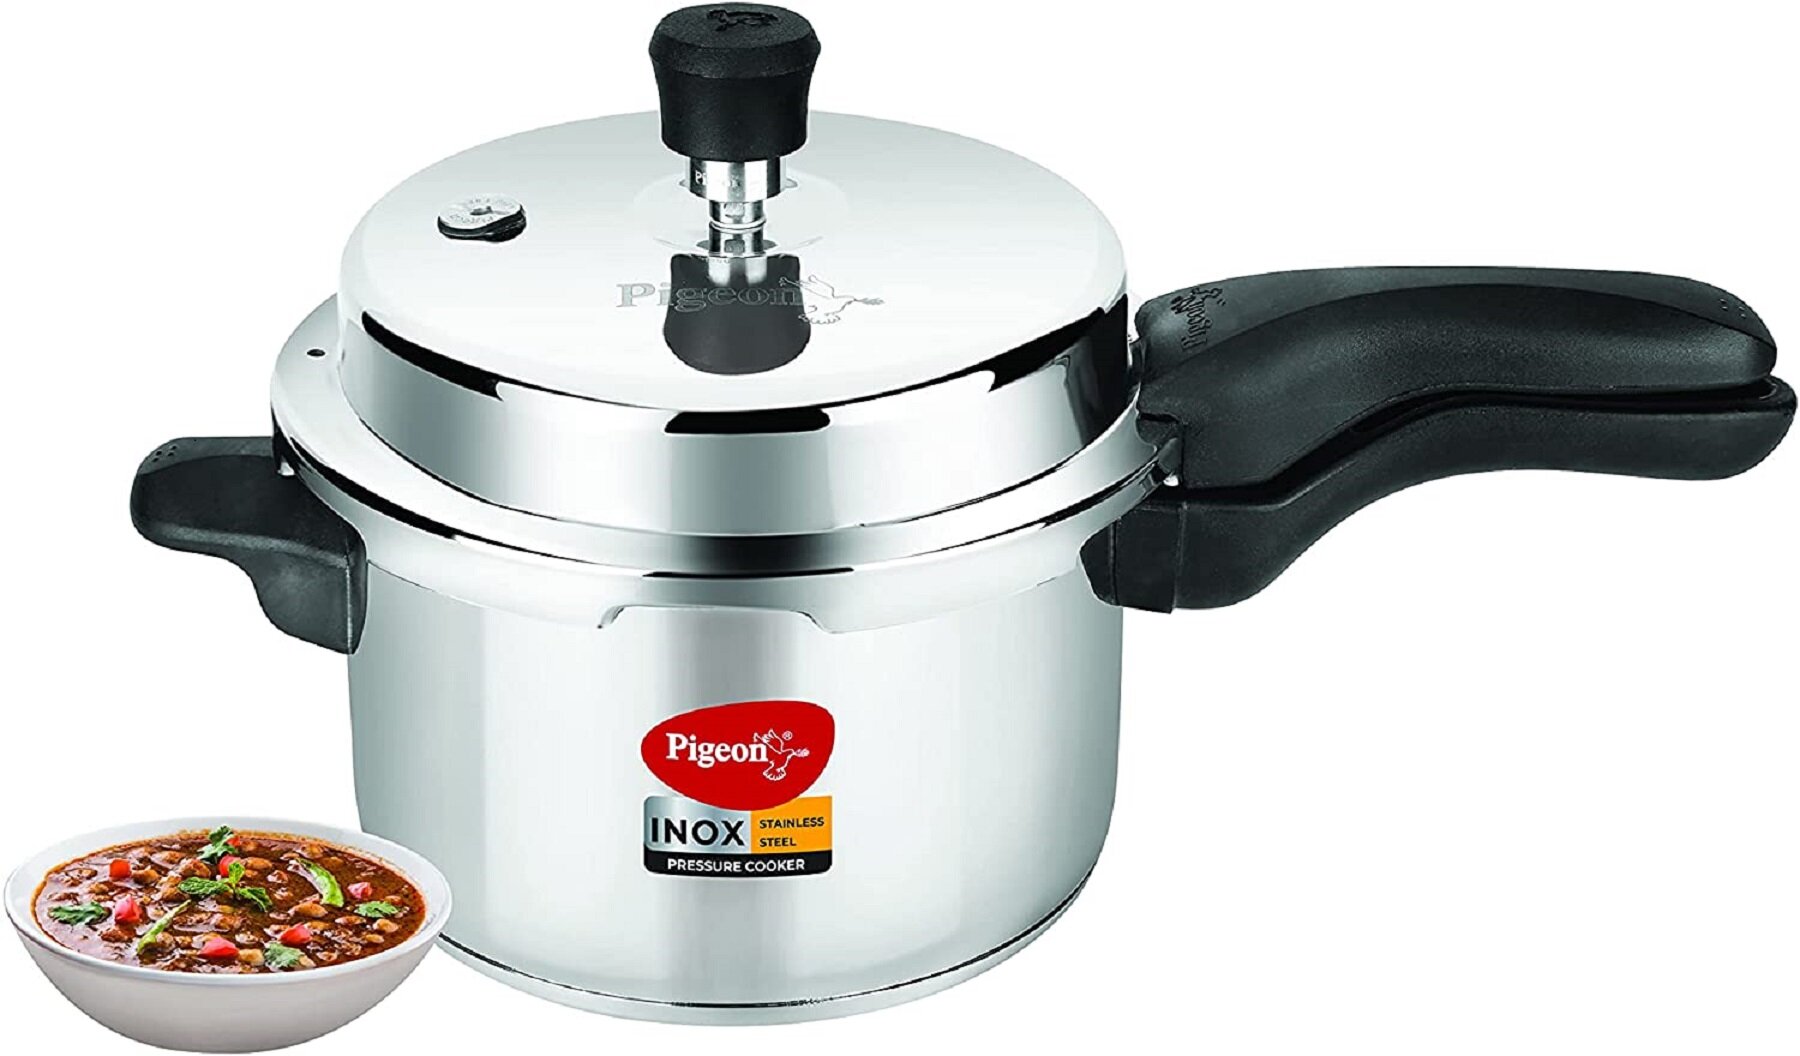 Pigeon Pressure Cooker-12 Quart Deluxe Aluminum Outer Lid Stovetop